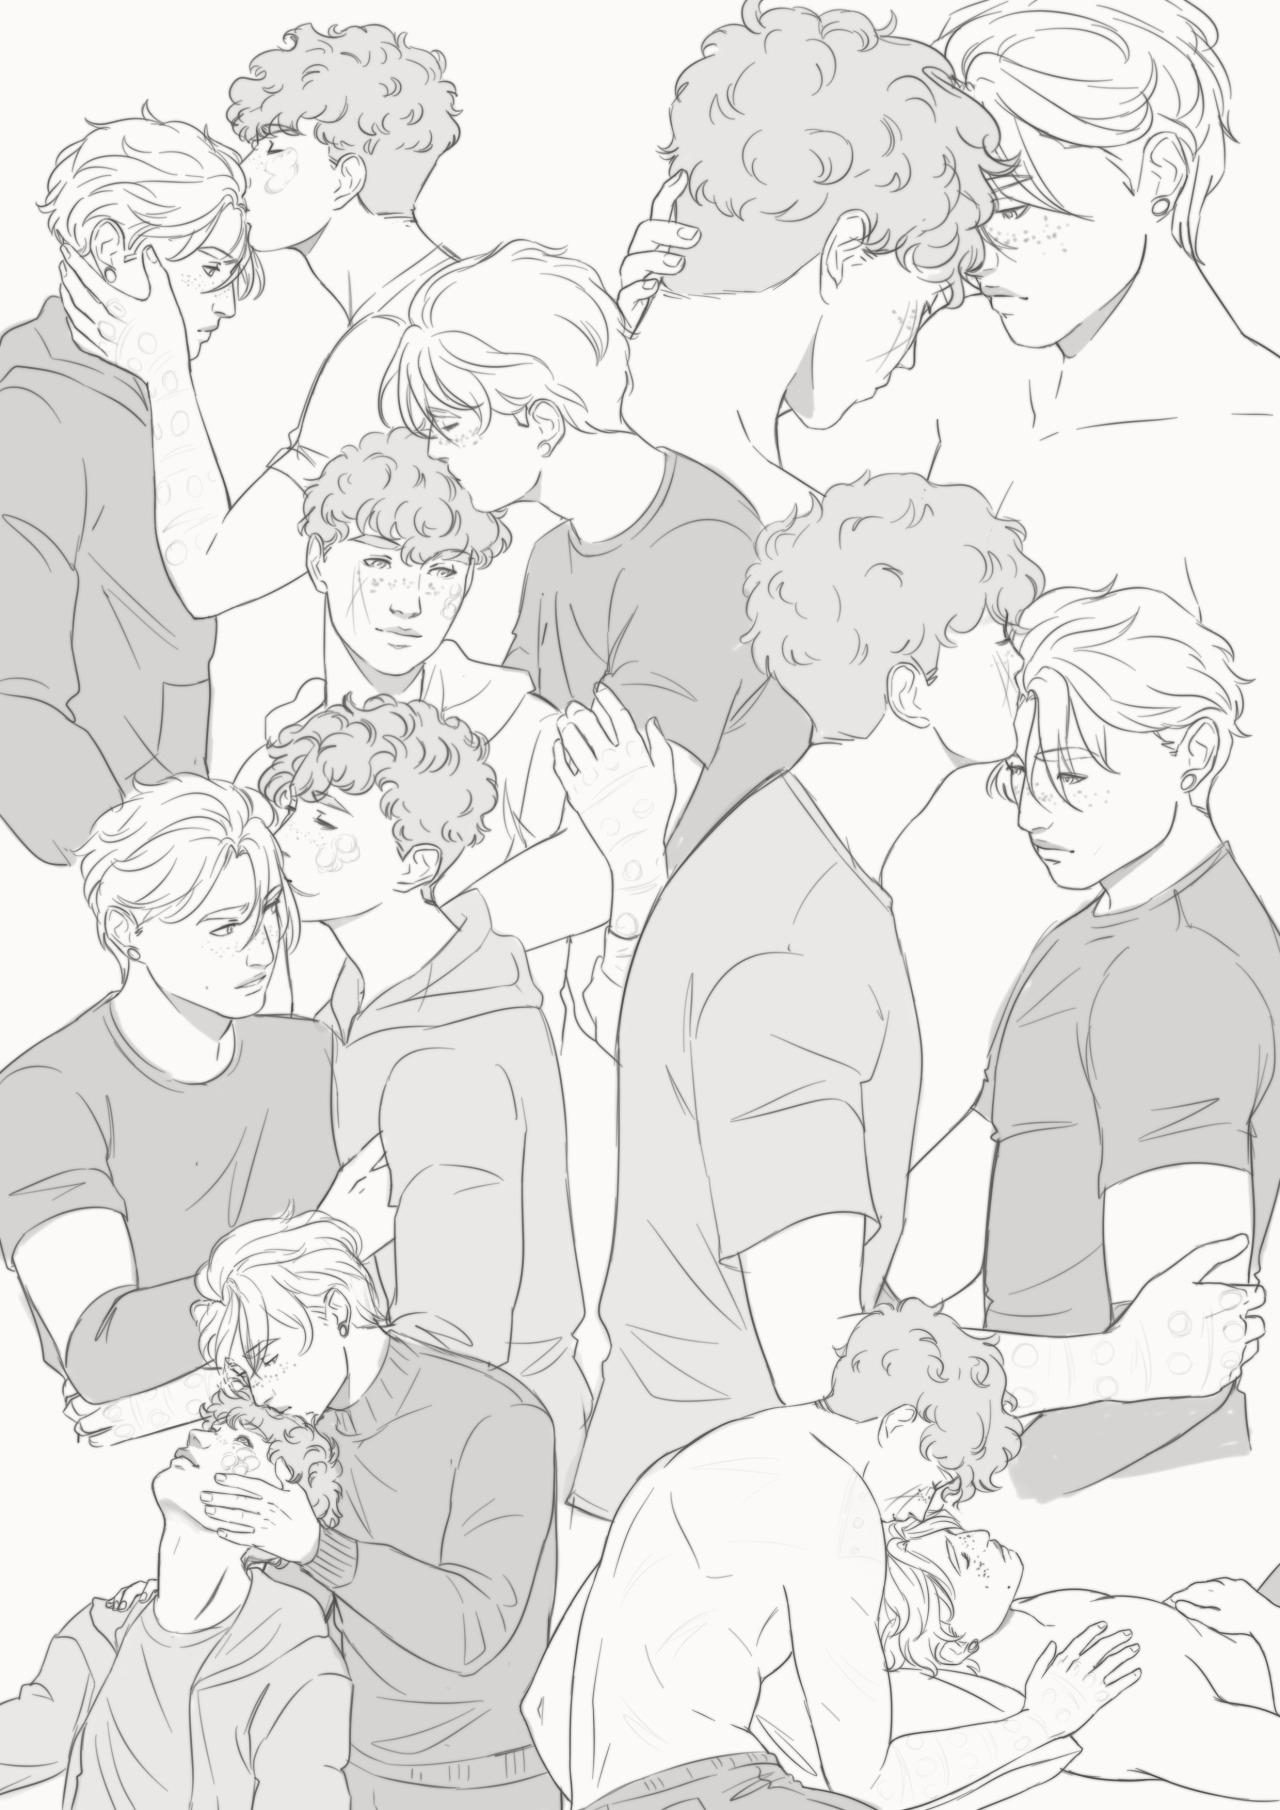 the soft content we all (I) needed #aftg#andrew minyard#neil josten#andreil #all for the game  #the foxhole court #tfc#myart#sketch page#sketch dump#forehead kisses